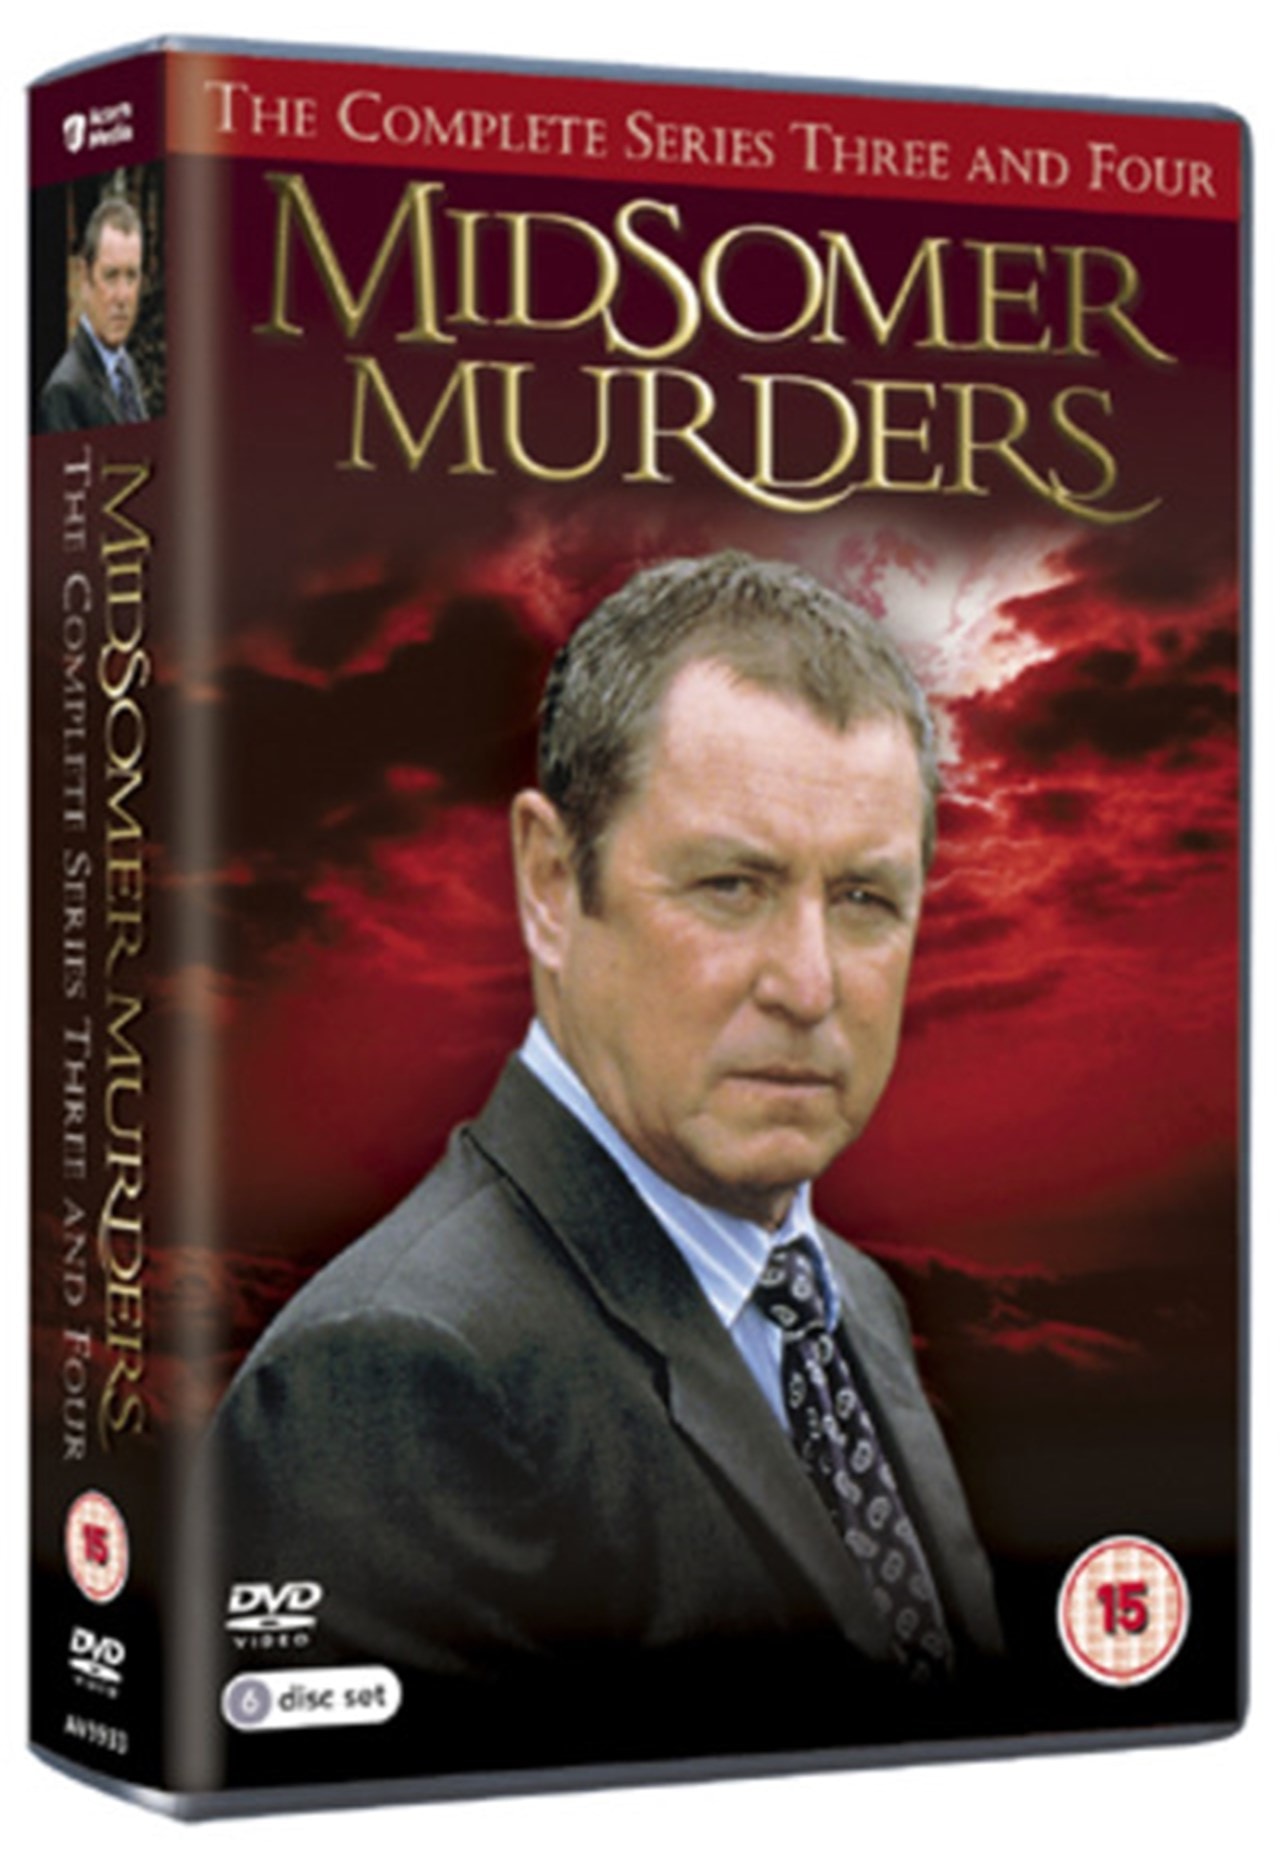 Midsomer Murders: The Complete Series Three and Four | DVD | Free ...